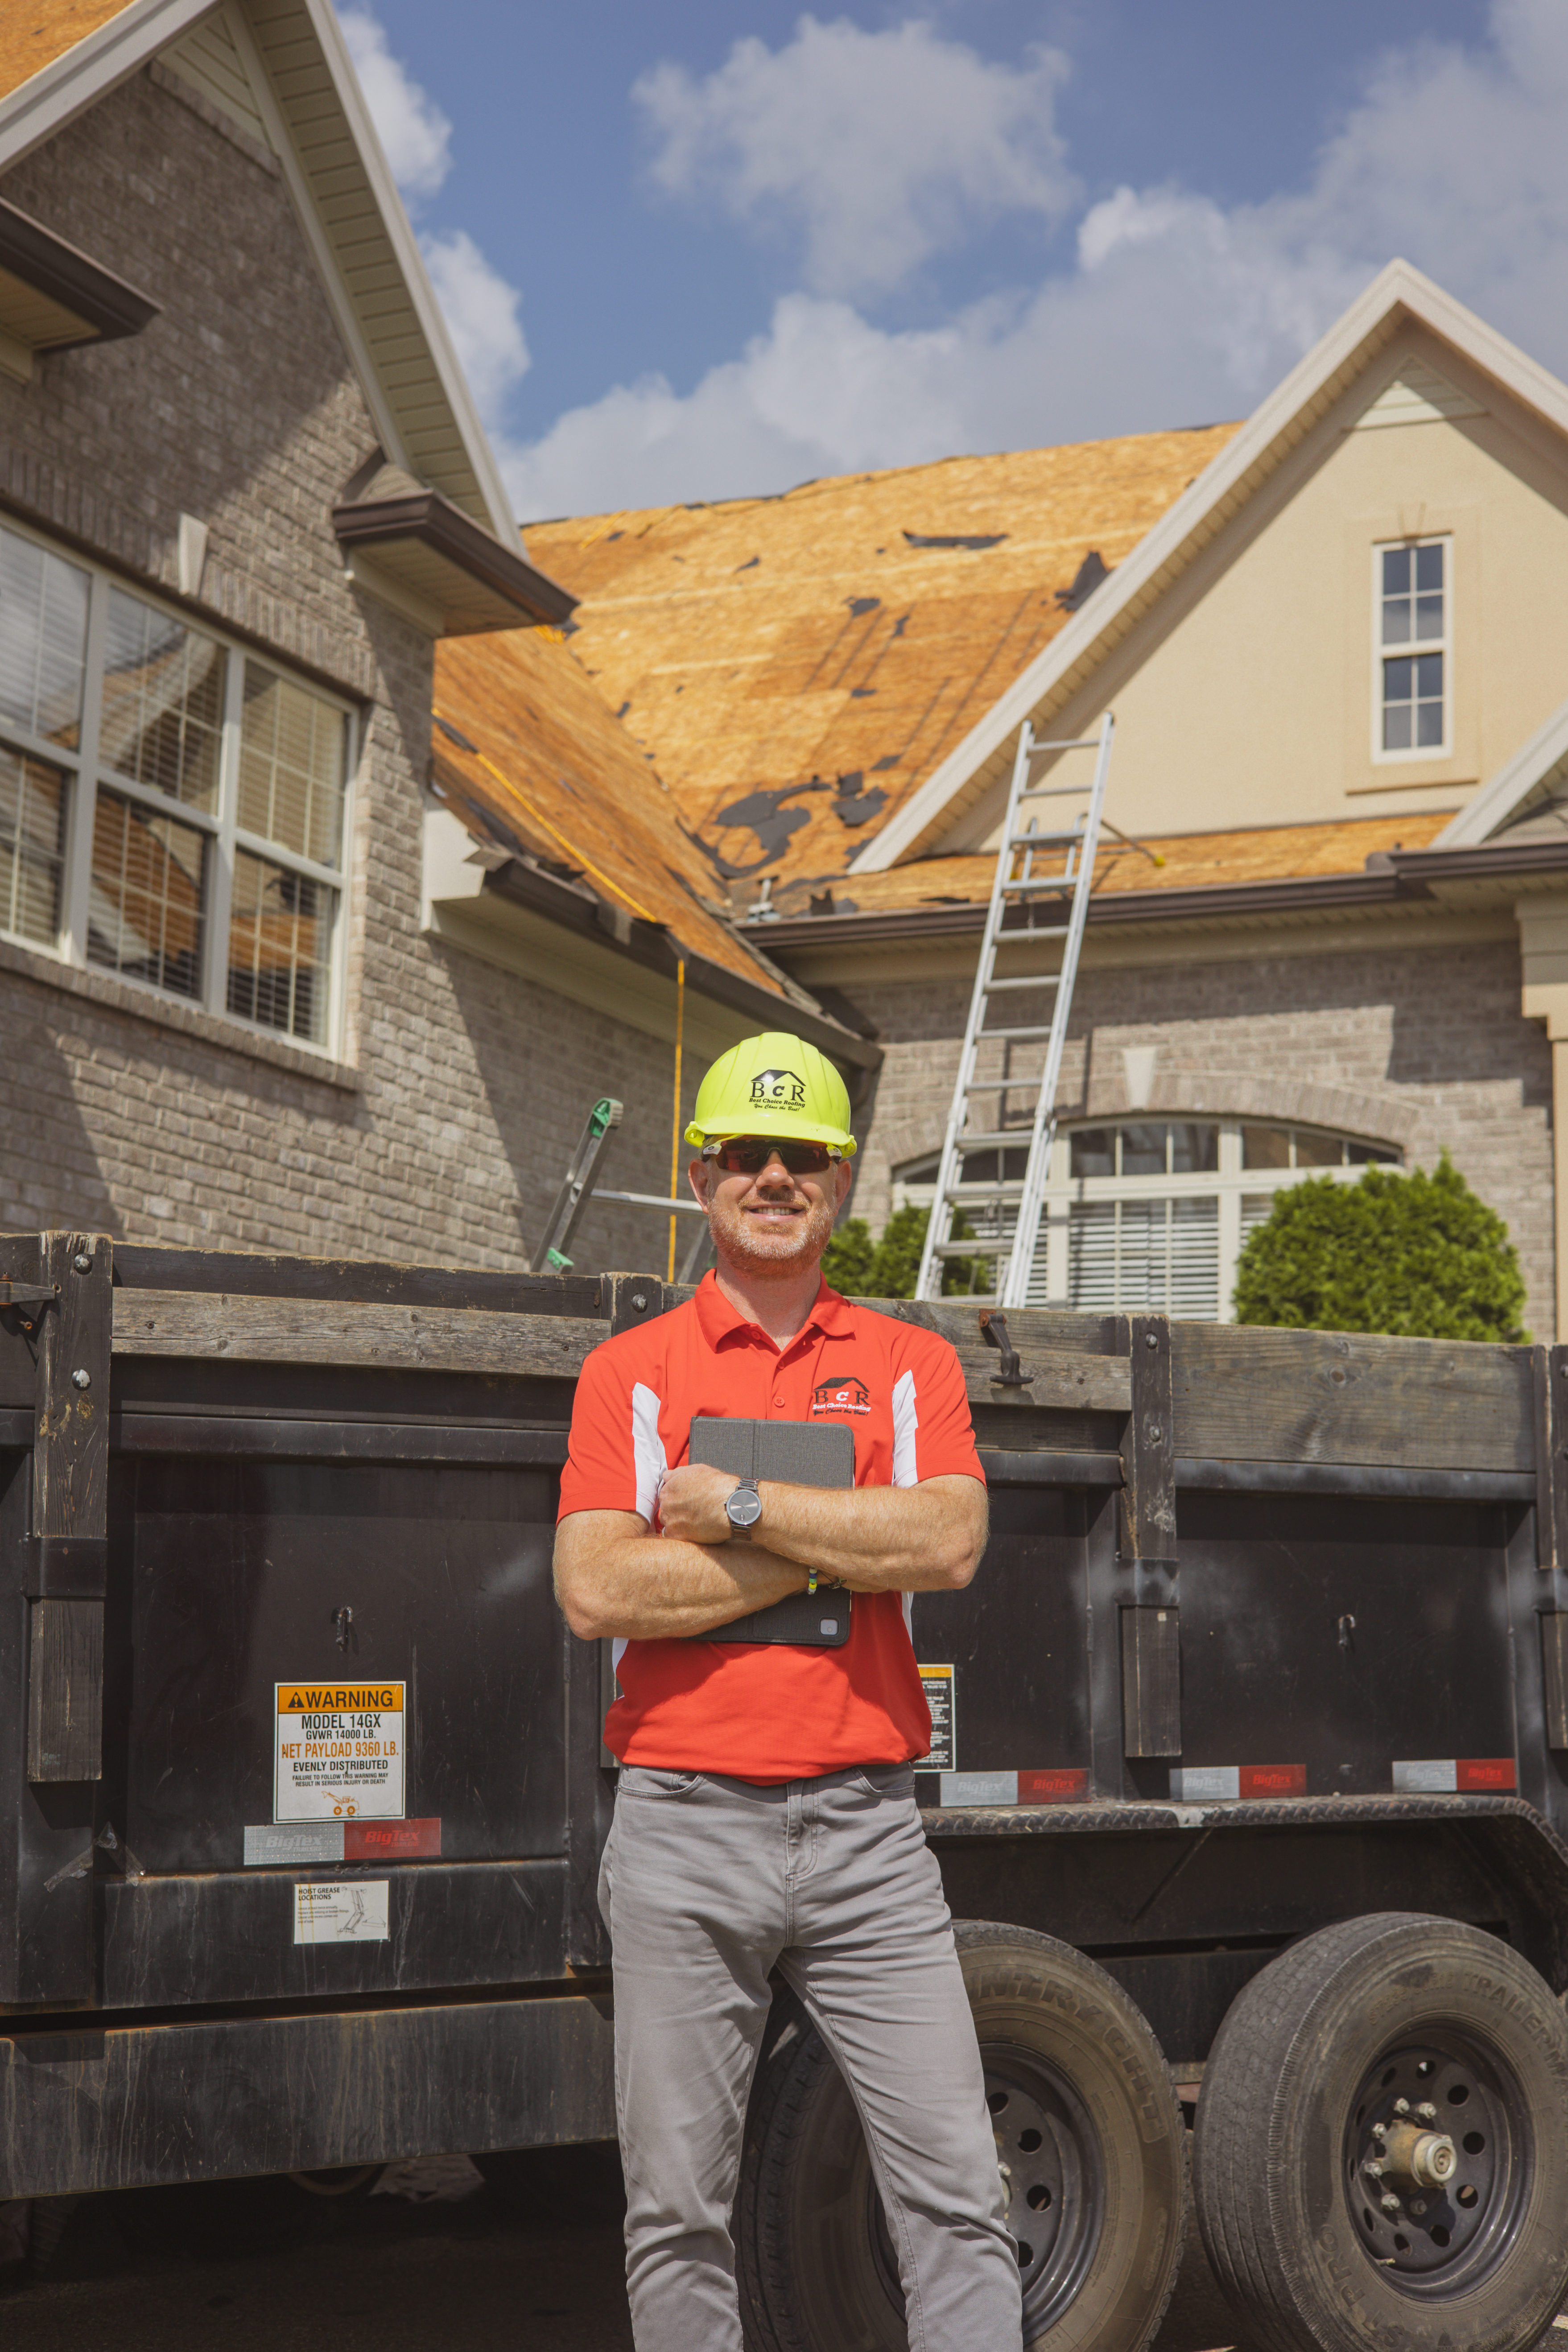 Trusted roofing experts